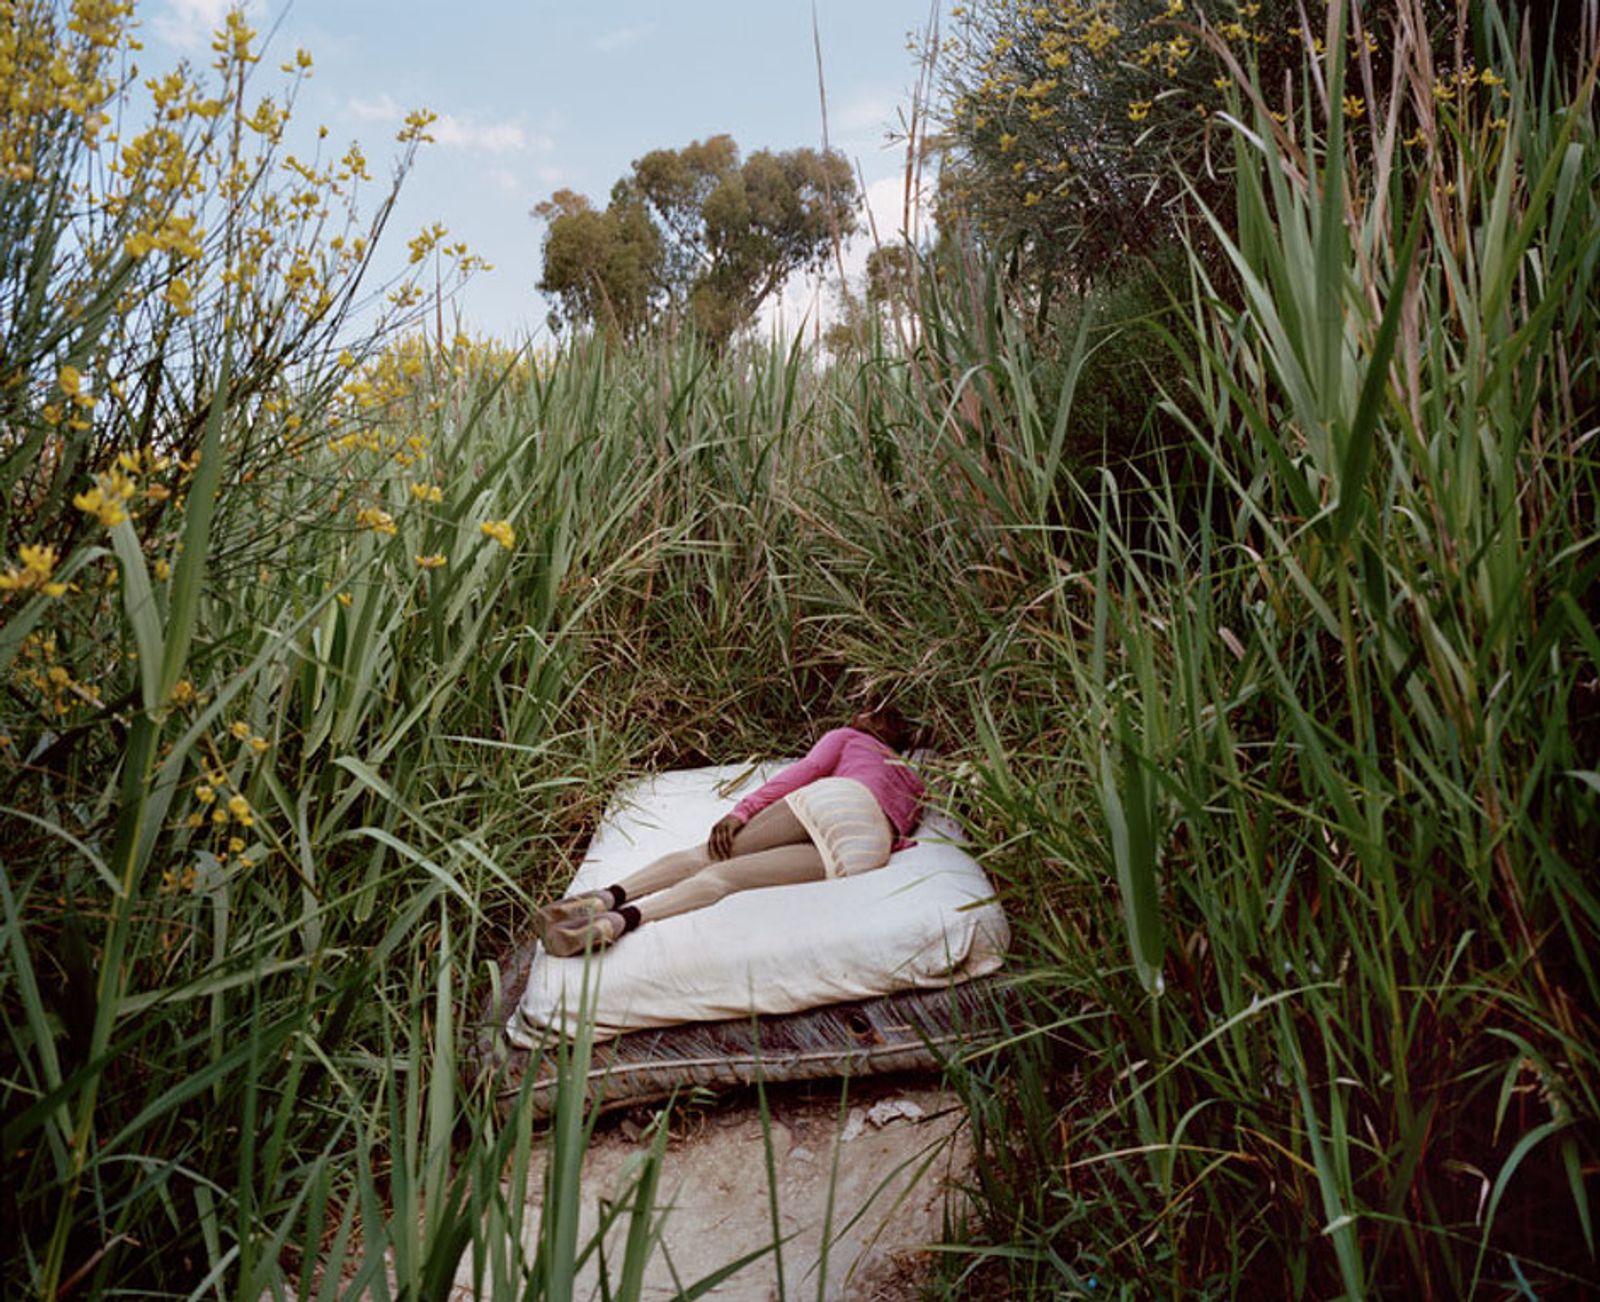 © Paolo Patrizi - Anna, a sex worker, on her makeshift bed, Rome, Italy